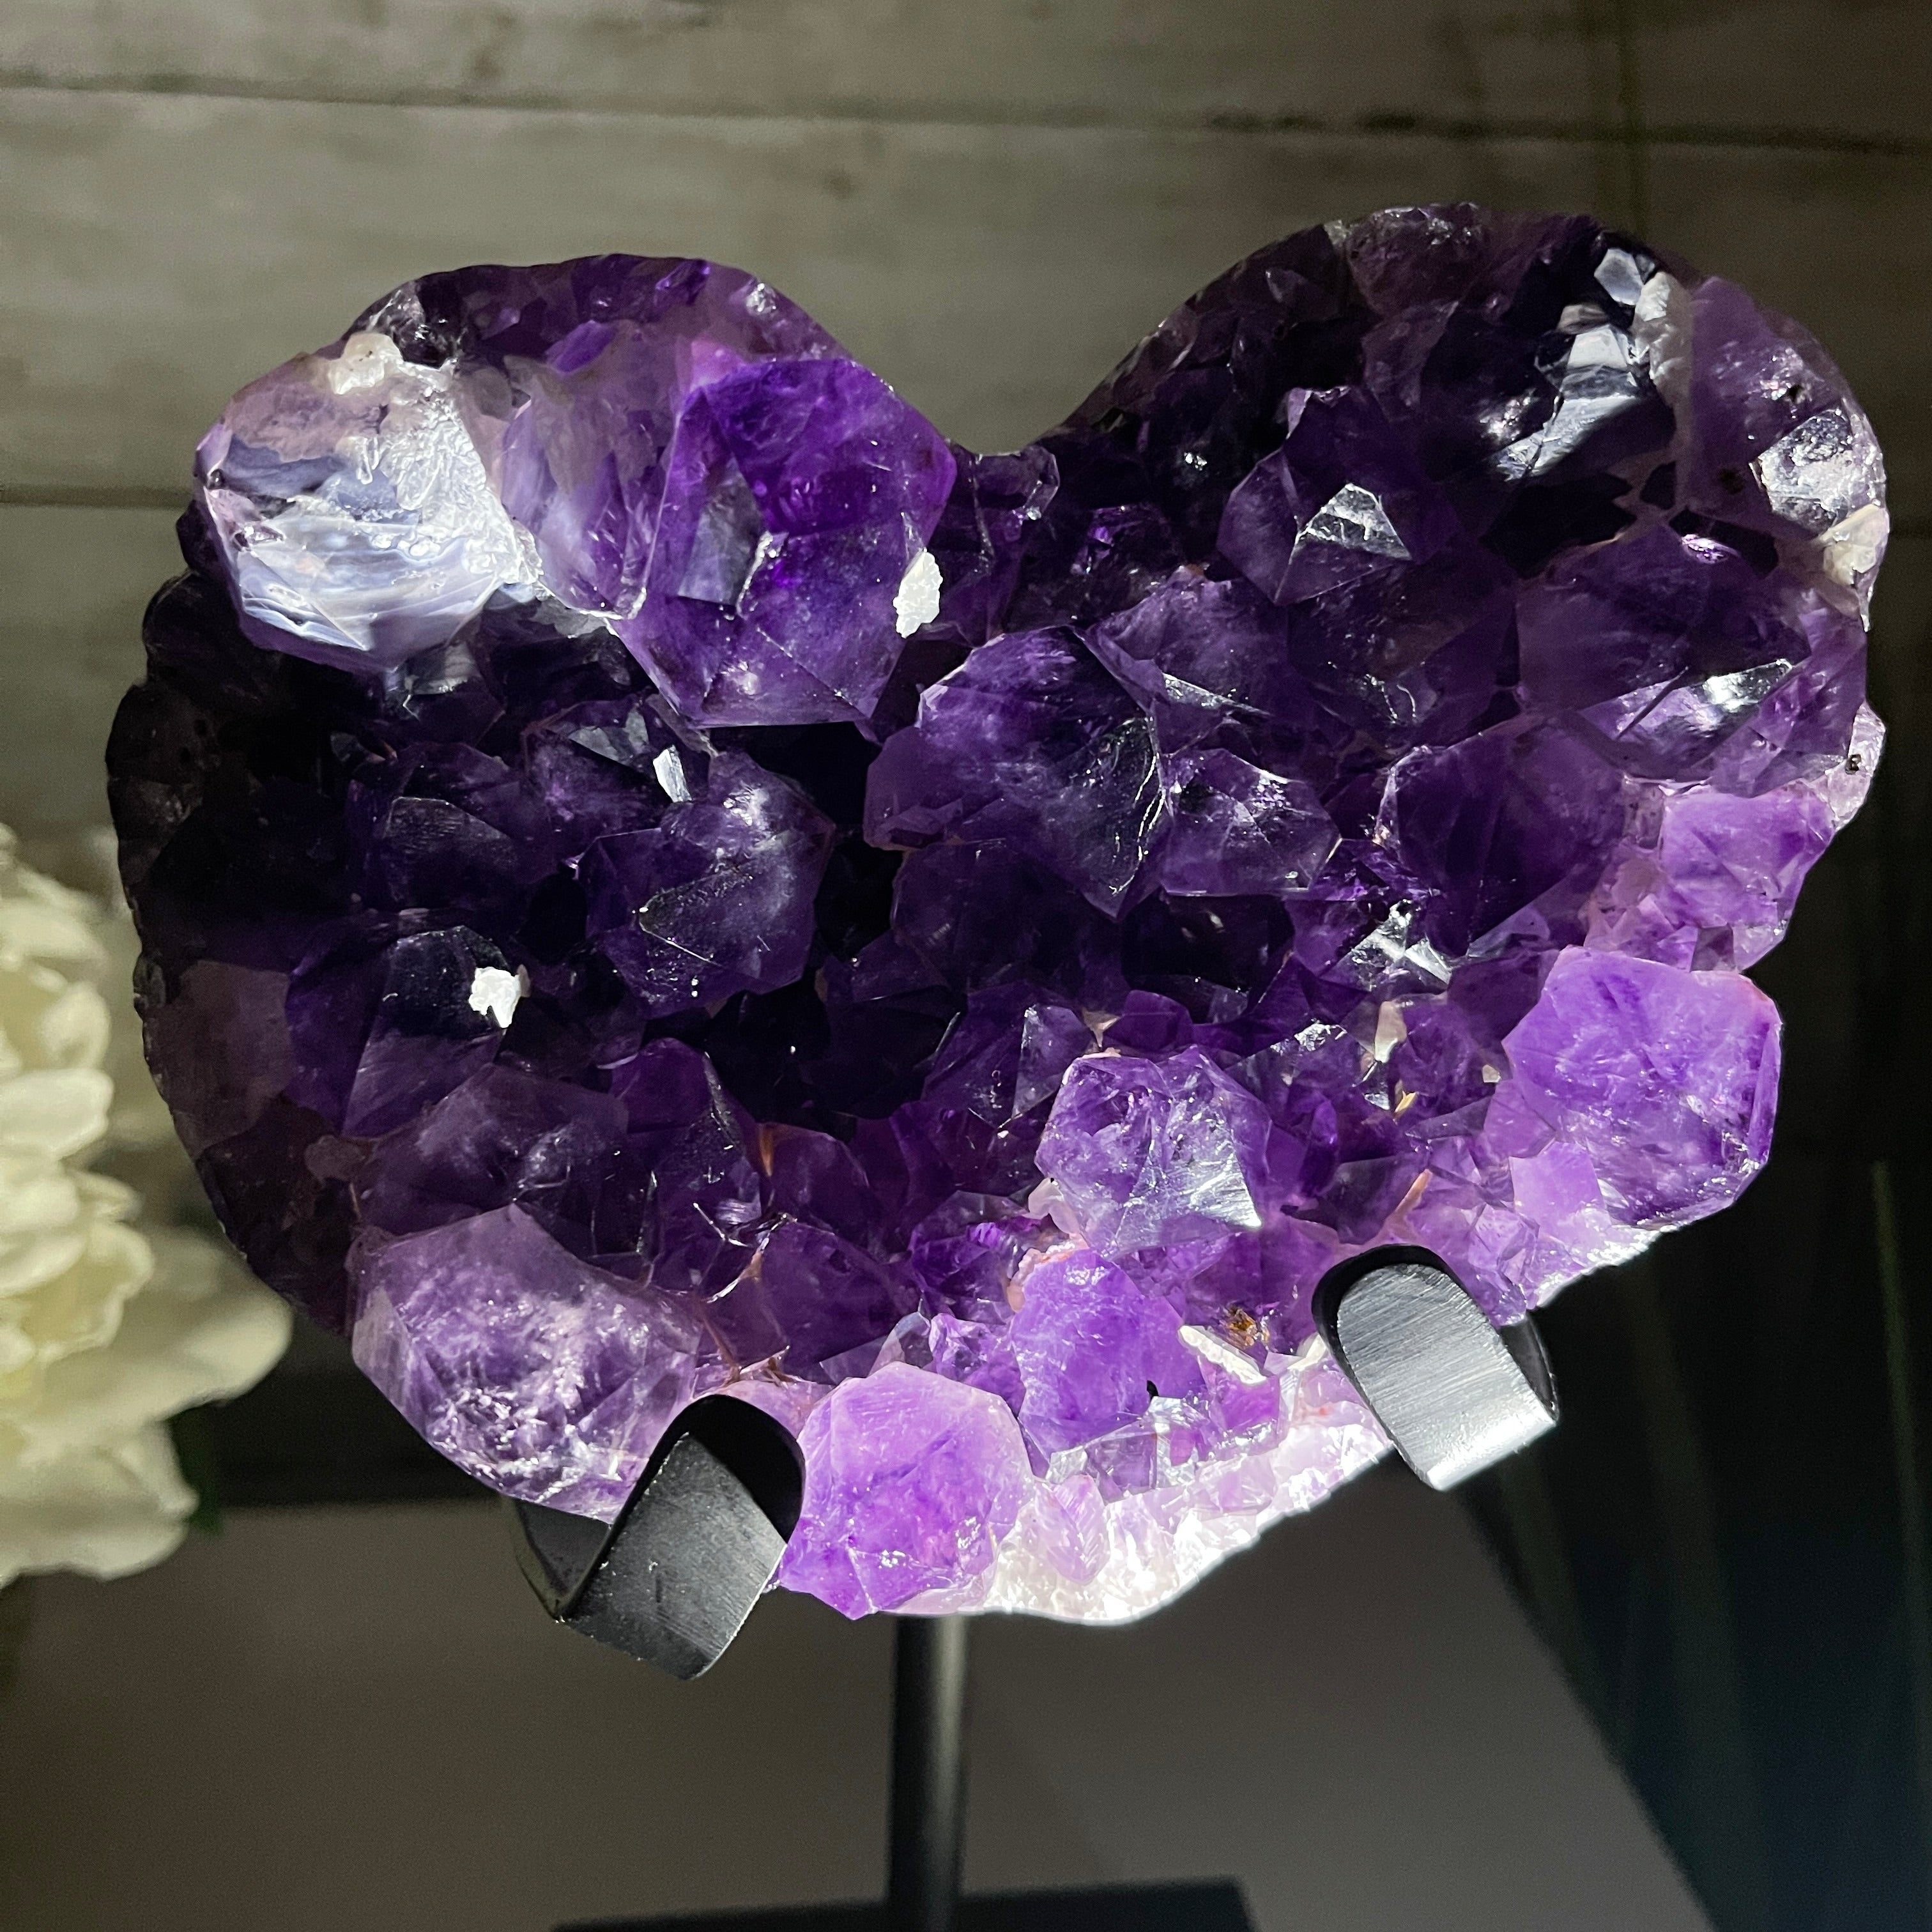 Close-up view of the Amethyst Heart Geode